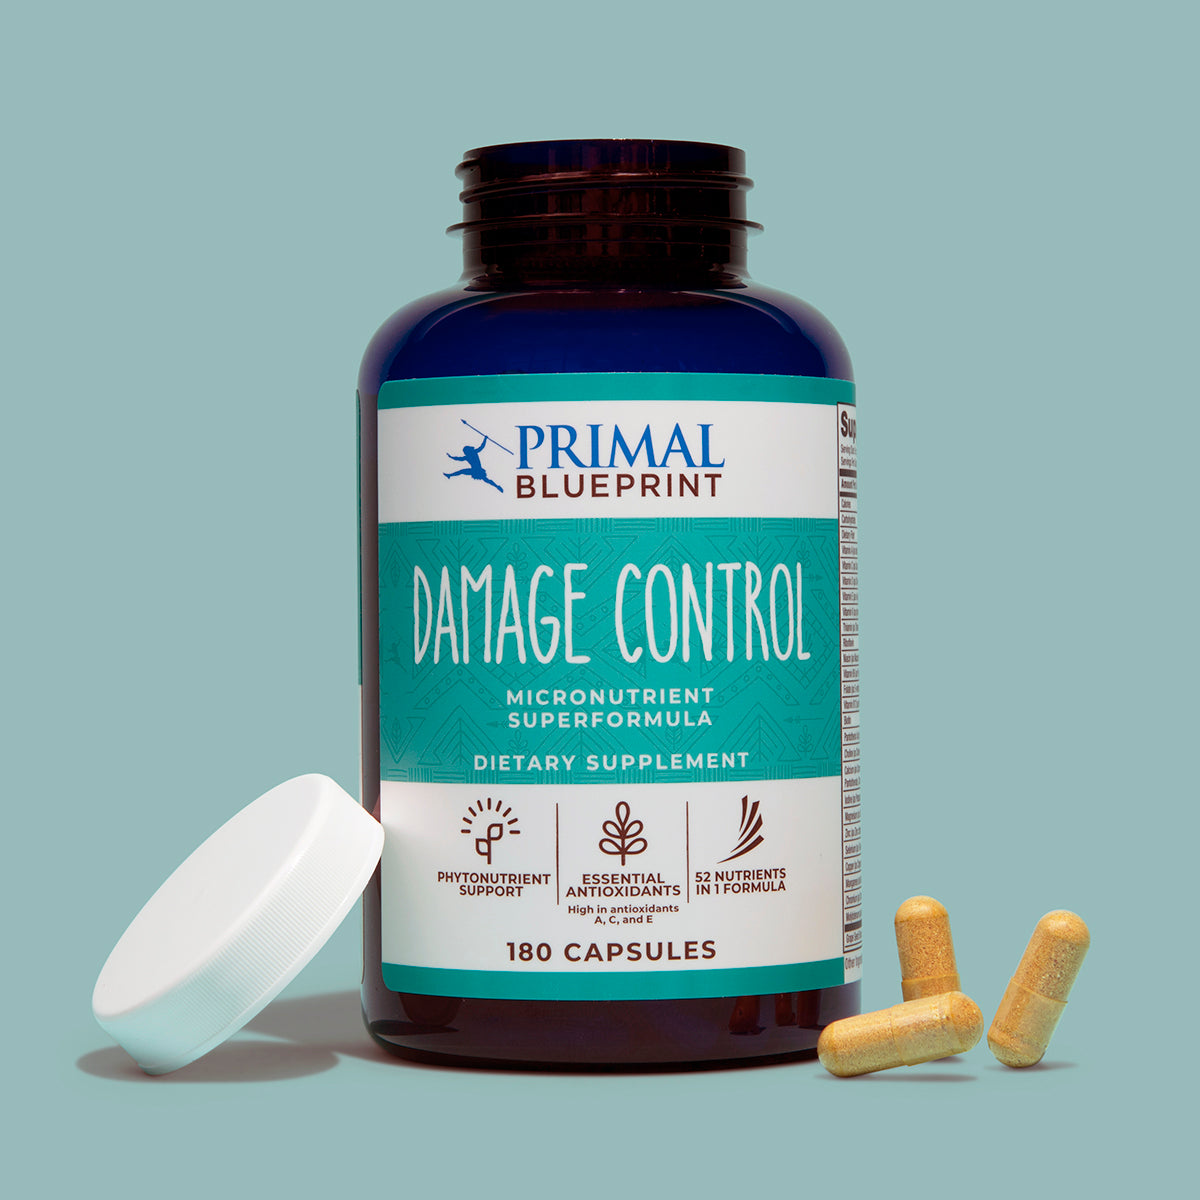 An uncapped blue bottle of Primal Blueprint Damage Control with a teal and white label next to a white cap and yellow supplements on a light blue background.